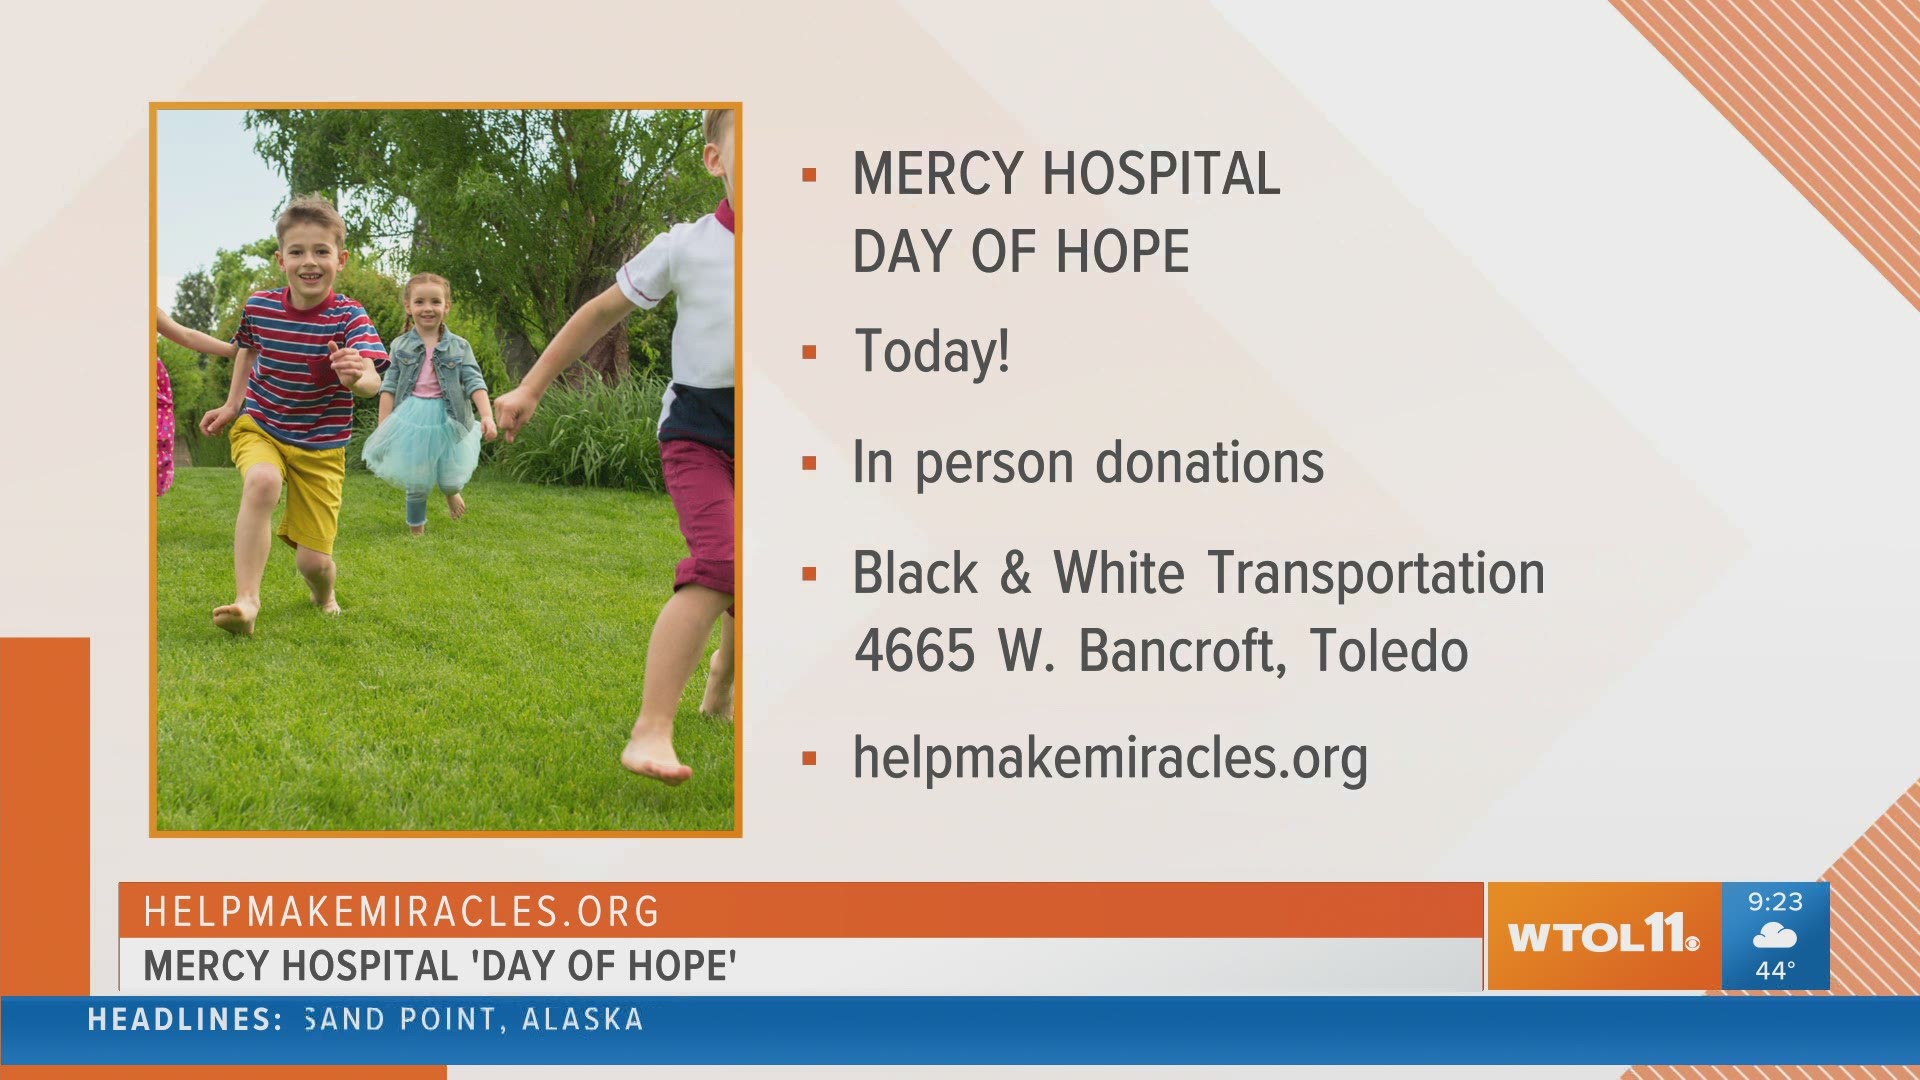 The Mercy Health 'Day of Hope' supports the Trauma Recovery Center, which provides care and support to victims of domestic violence and child abuse.